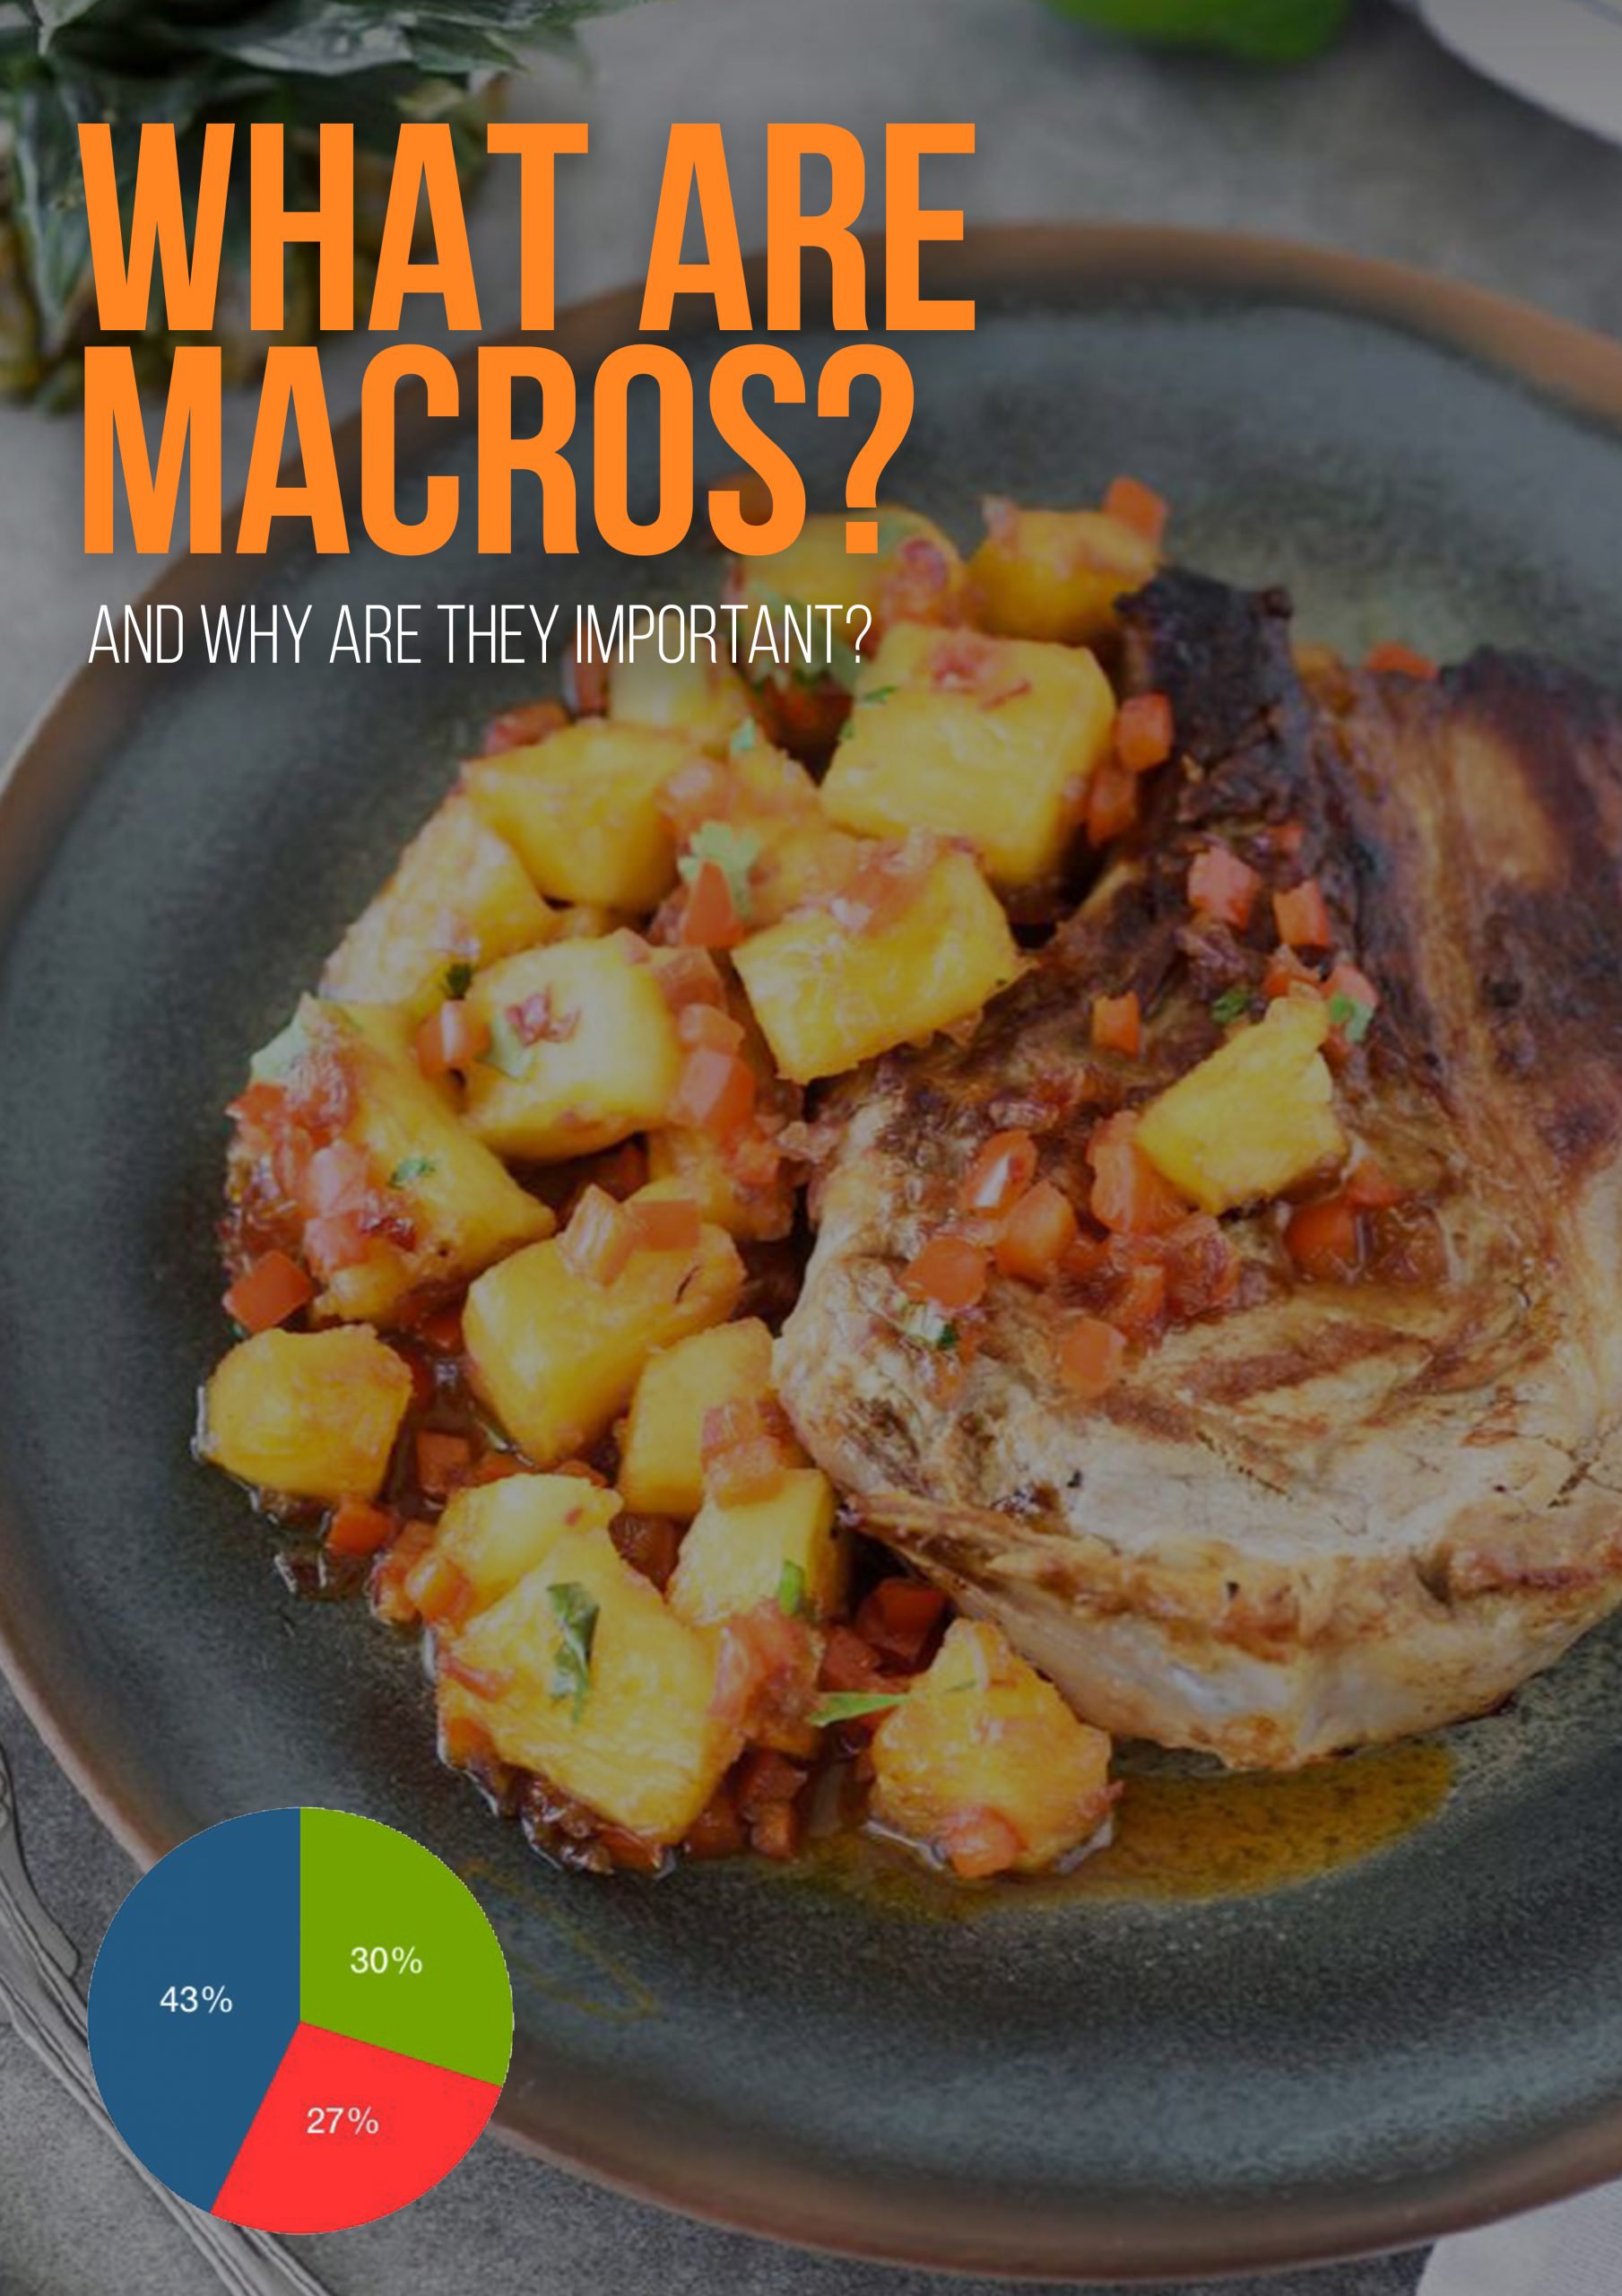 What are Macros?